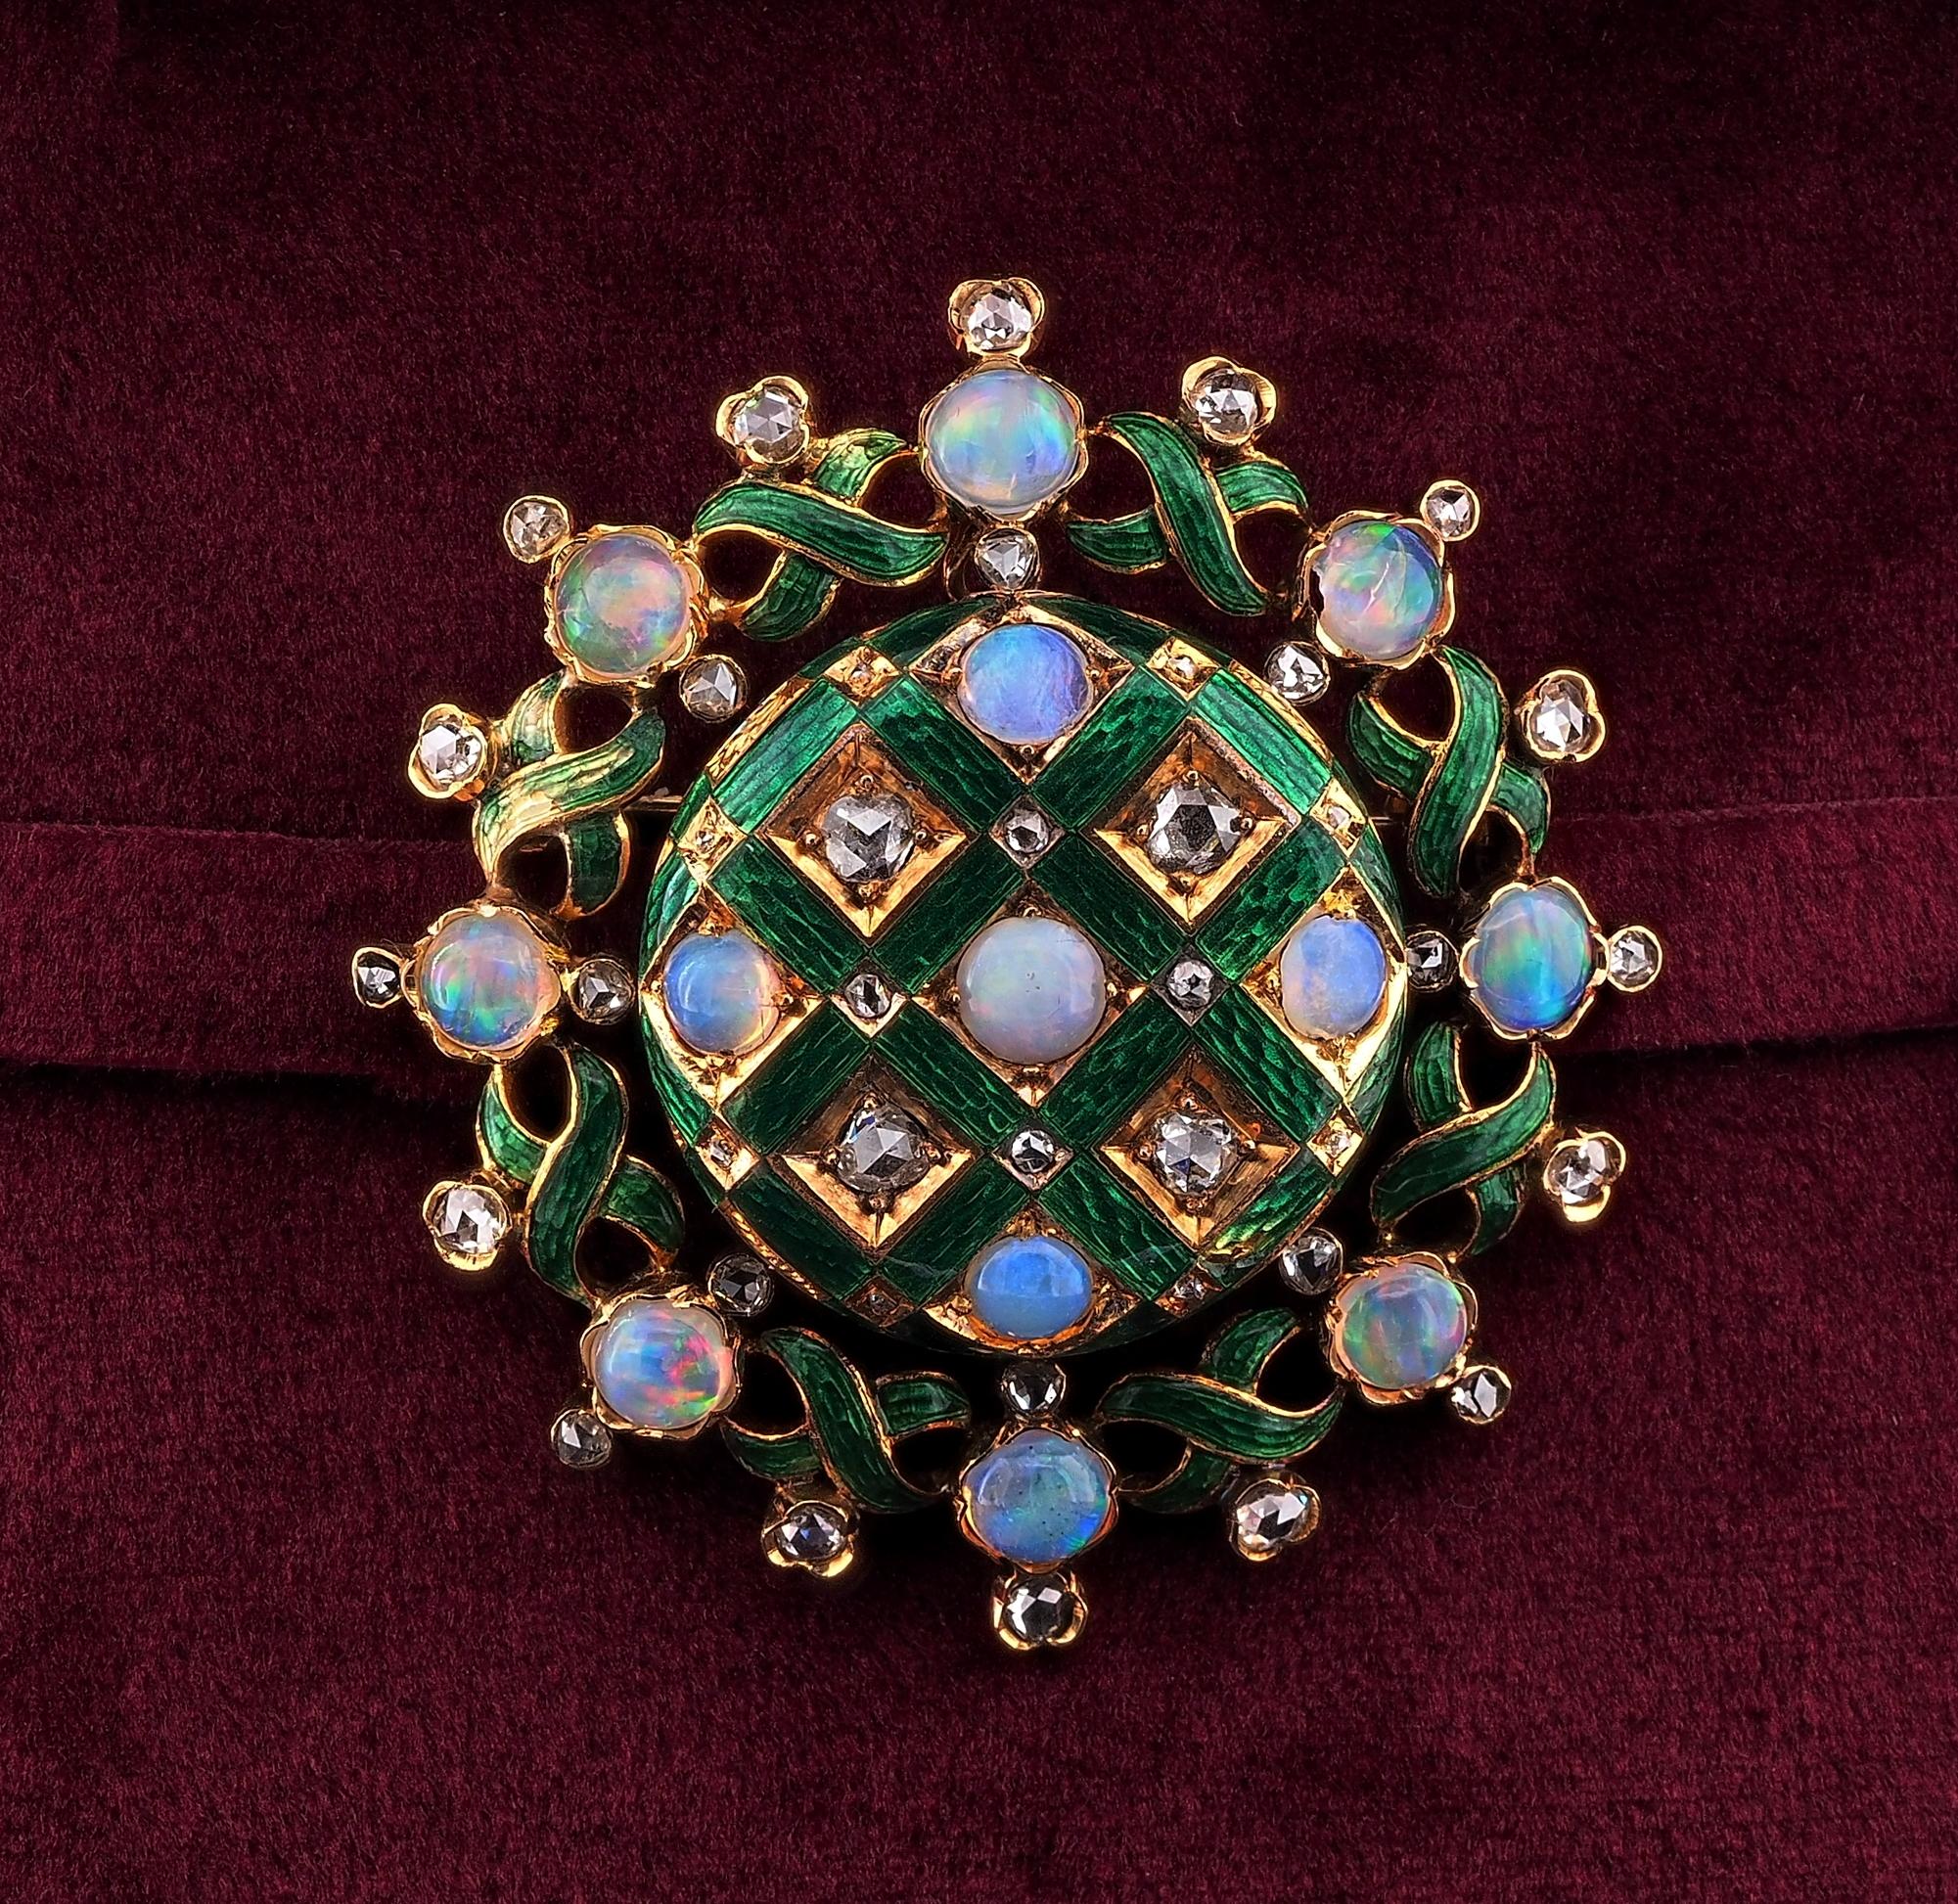 Rare & Unique
This impressive and colourful, large brooch pendant is Victorian period, 1875 ca.
Artistry hand made to impress of solid 18 KT gold
Large round shaped in a fantasy play of colours between Guilloche, translucent, glossy Emerald Green